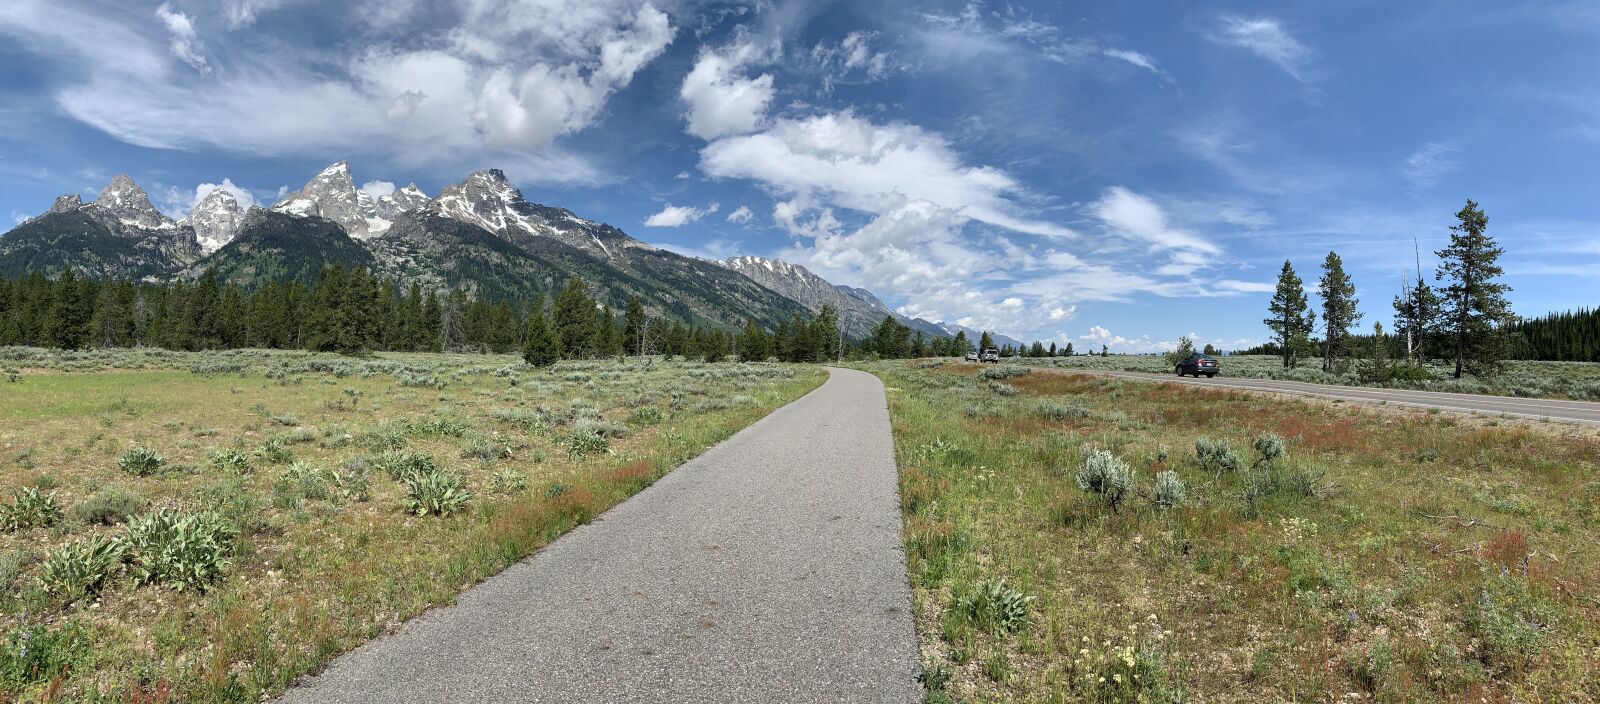 Apple iPhone XS + iPhone XS back camera 4.25mm f/1.8 sample photo. Mountain road, tetons, wyoming photography